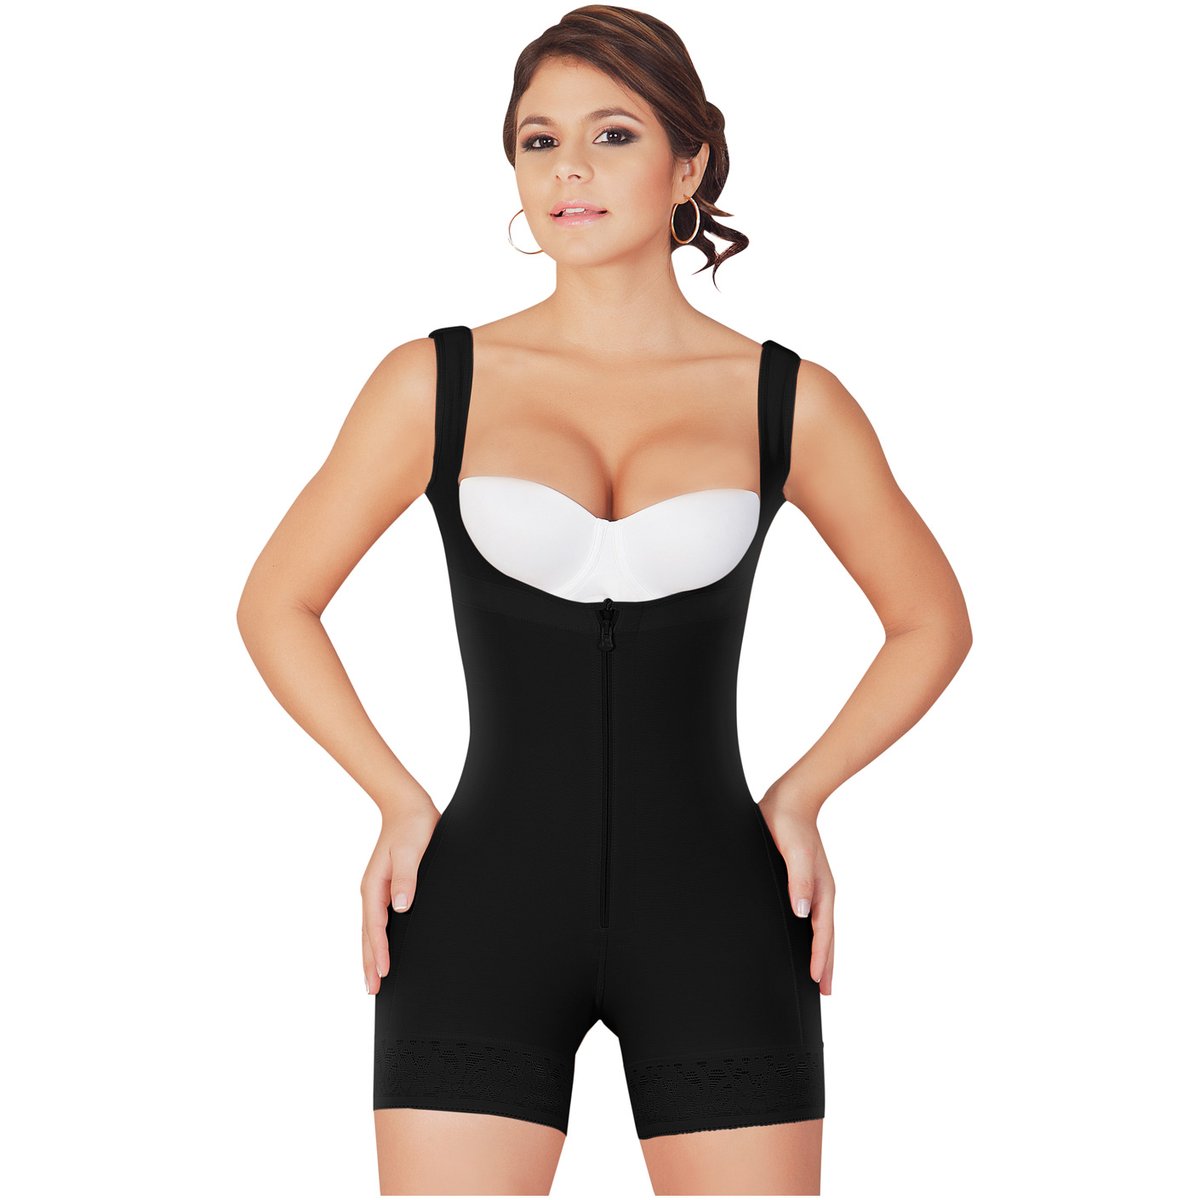 Corset belt for weight loss and body shaping - Romania, New - The